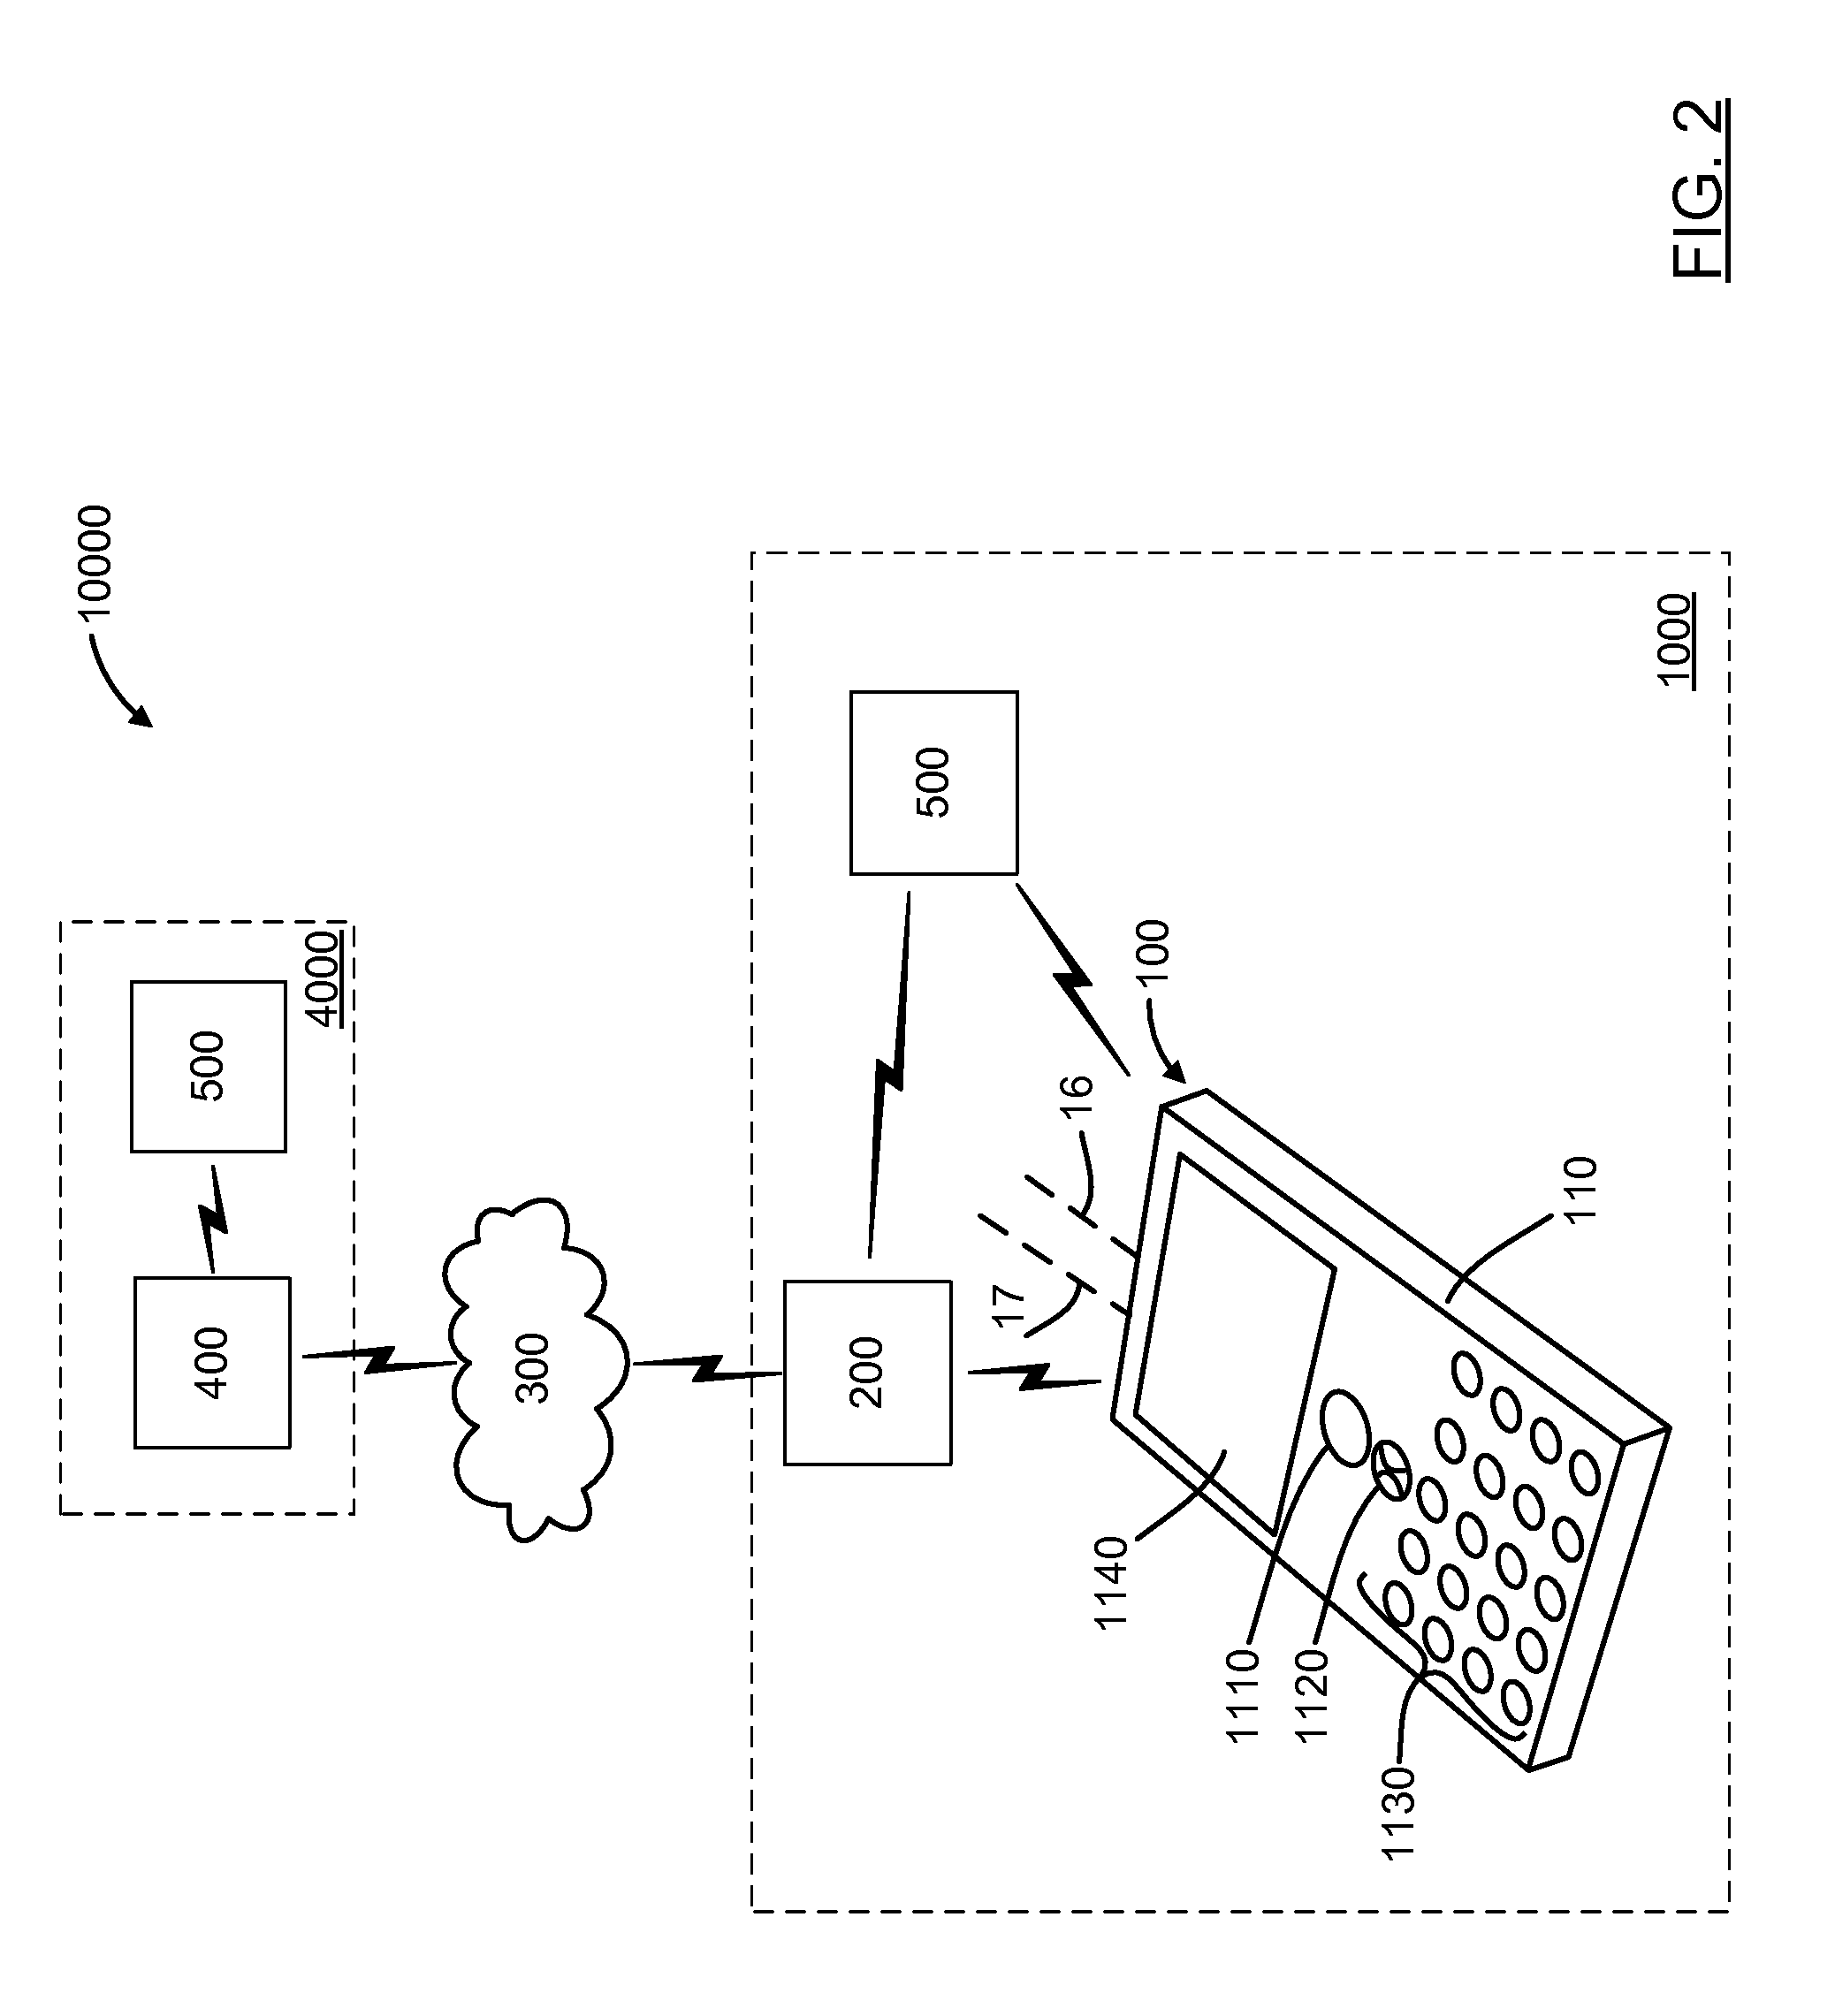 System operative to adaptively select an image sensor for decodable indicia reading